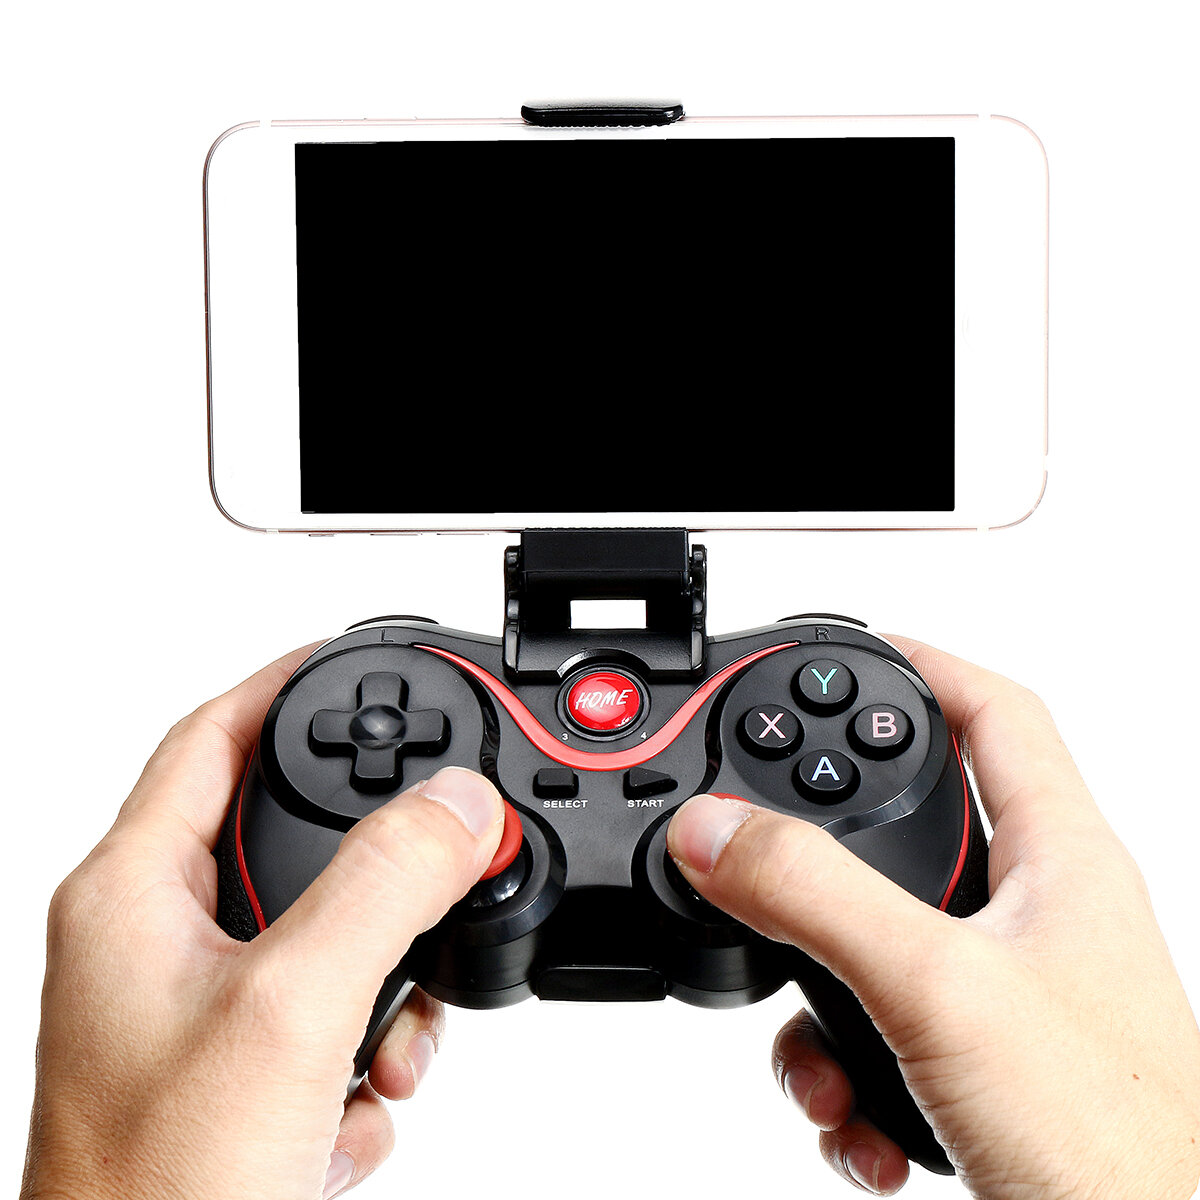 

T3 bluetooth Wireless Gamepad Gaming Controller for iOS Android Mobile Phone Tablet PC VR Glasses Games for Xiaomi TV Bo